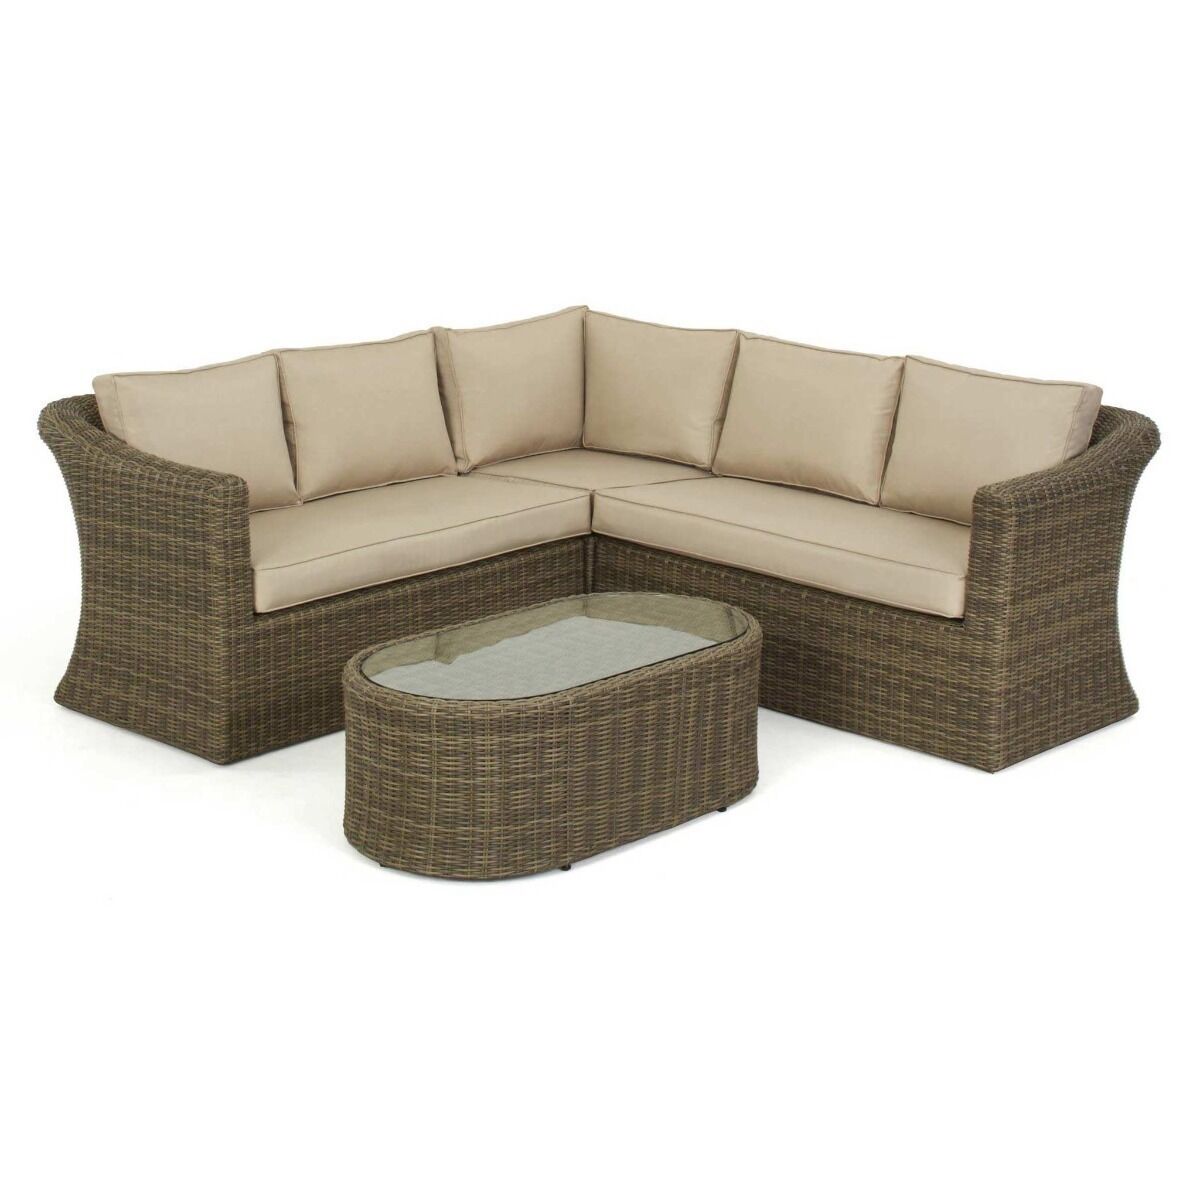 Maze - Winchester Small Rattan Corner Group product image